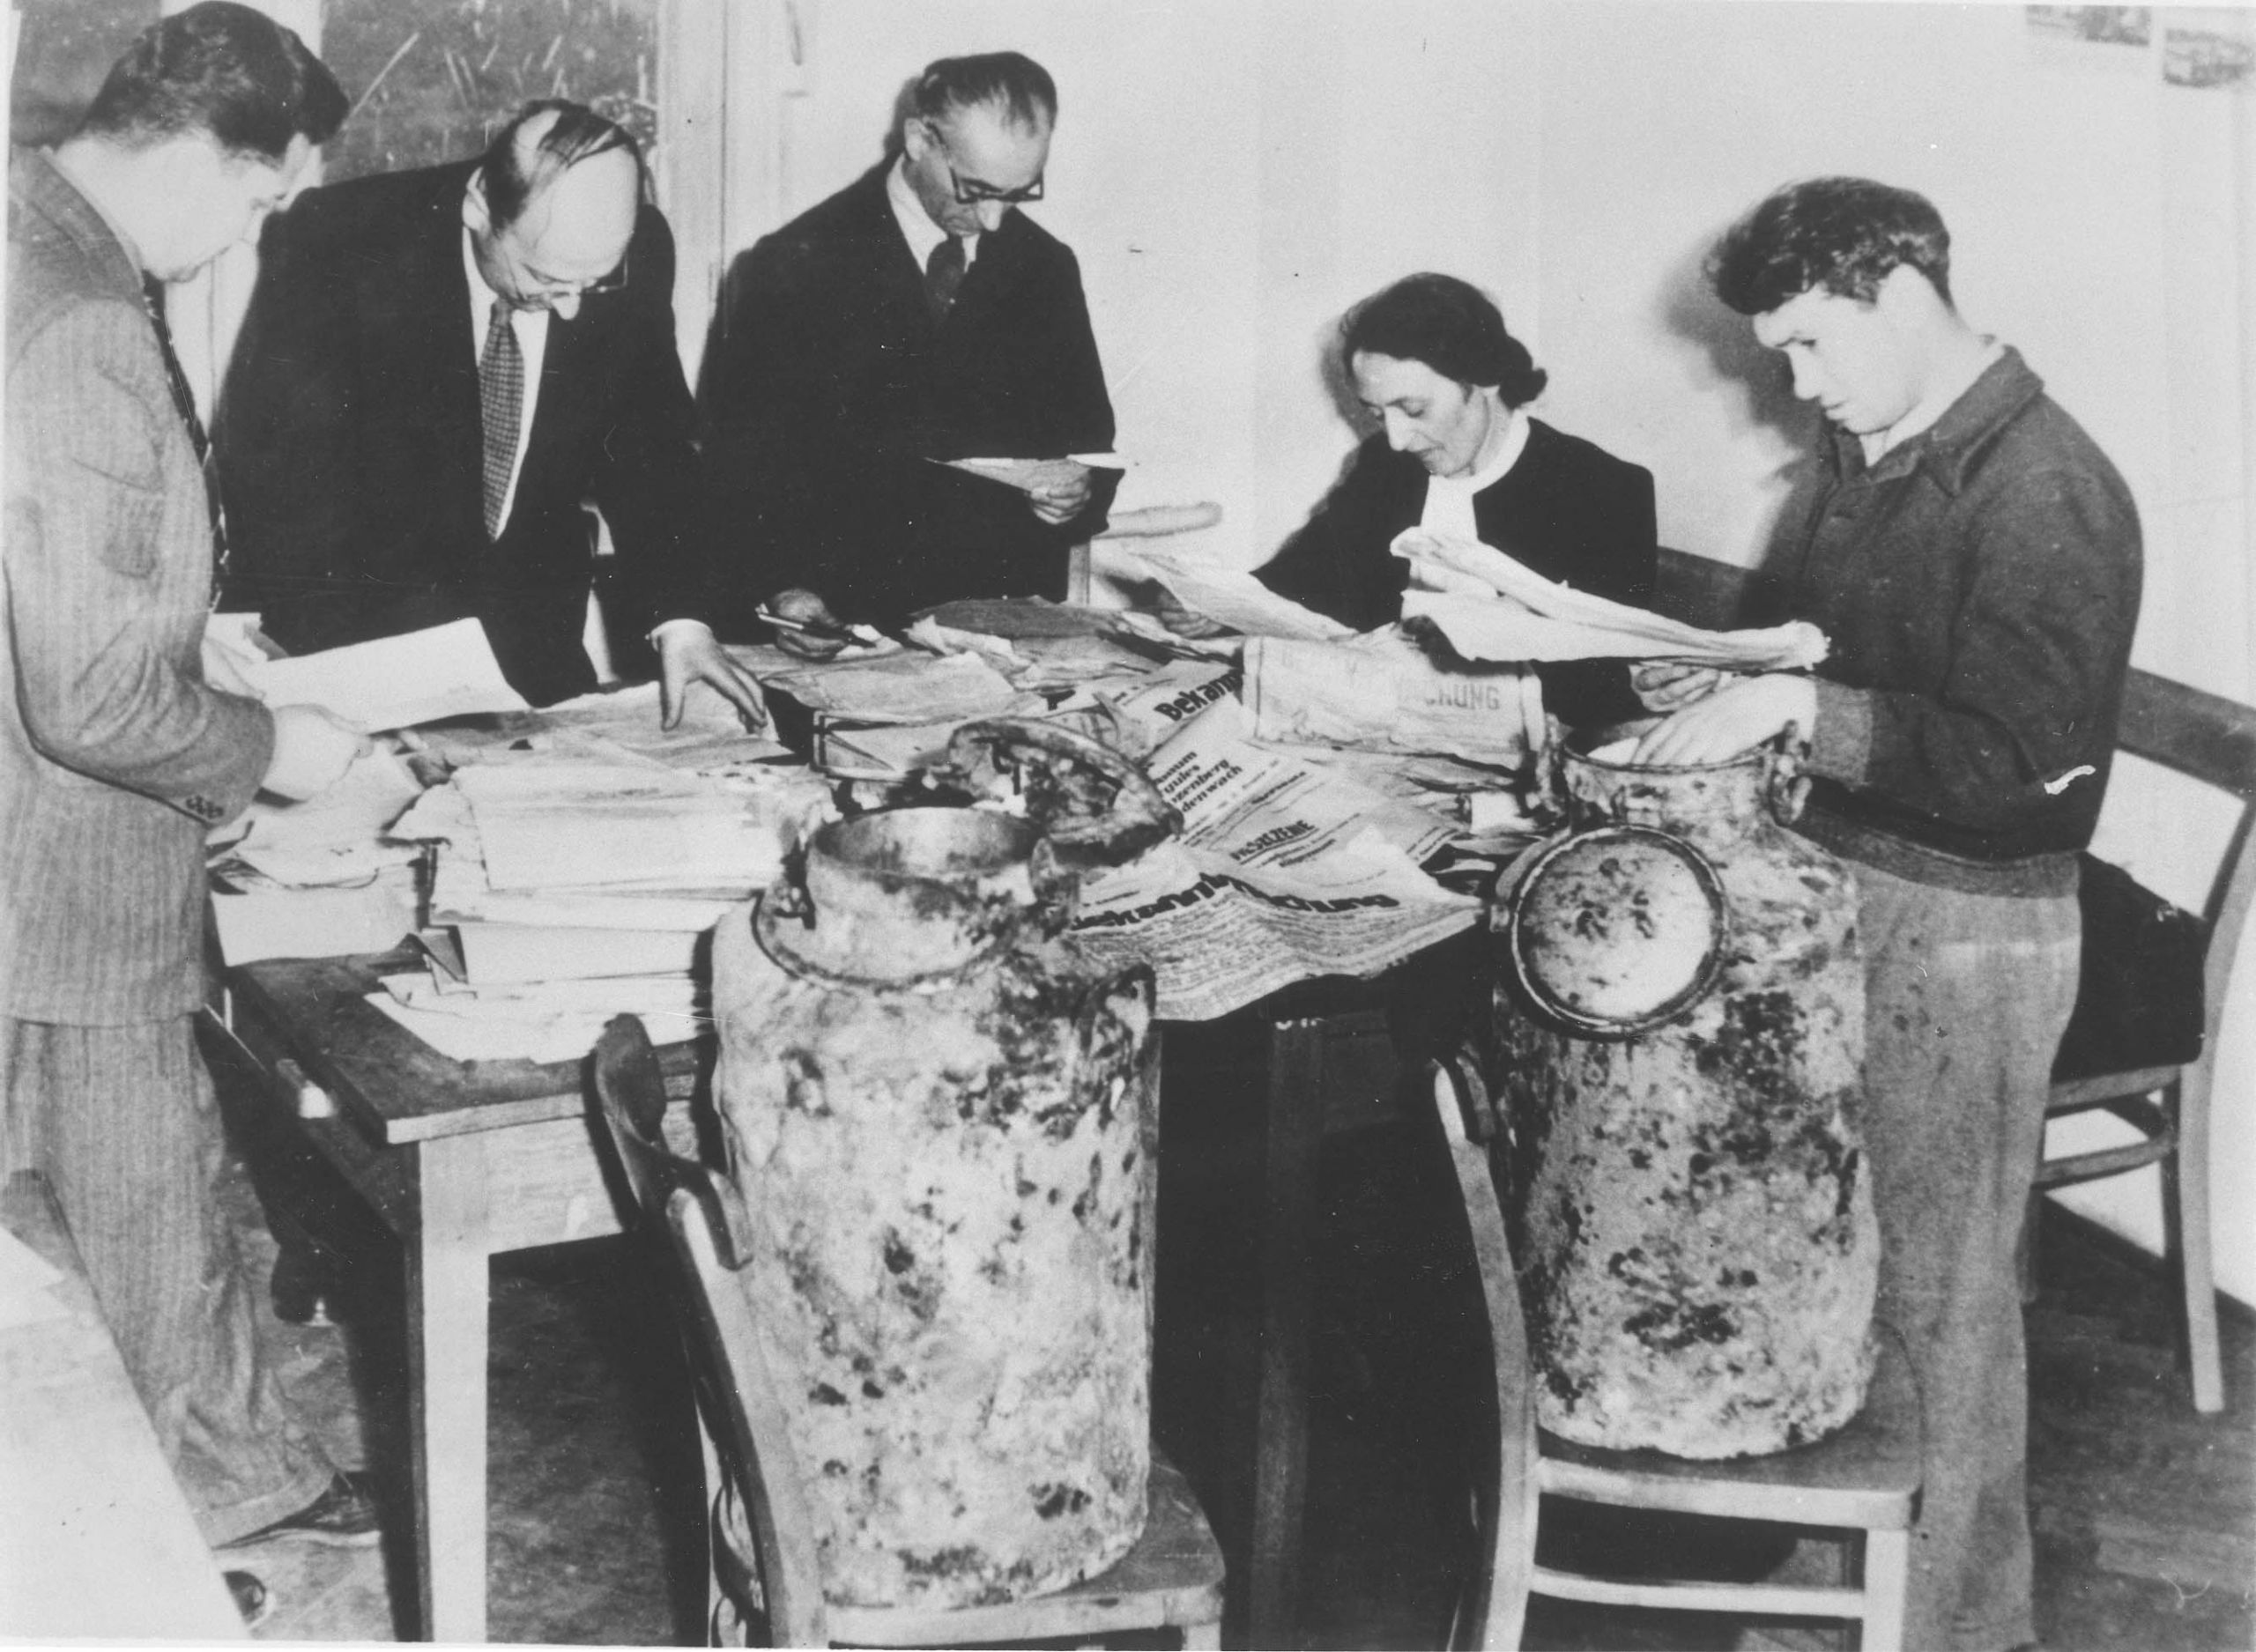 Warsaw, Poland, December 1950. Researchers from the Jewish Historical Institute classifying the Ringelblum archive | Credit: Yad Vashem